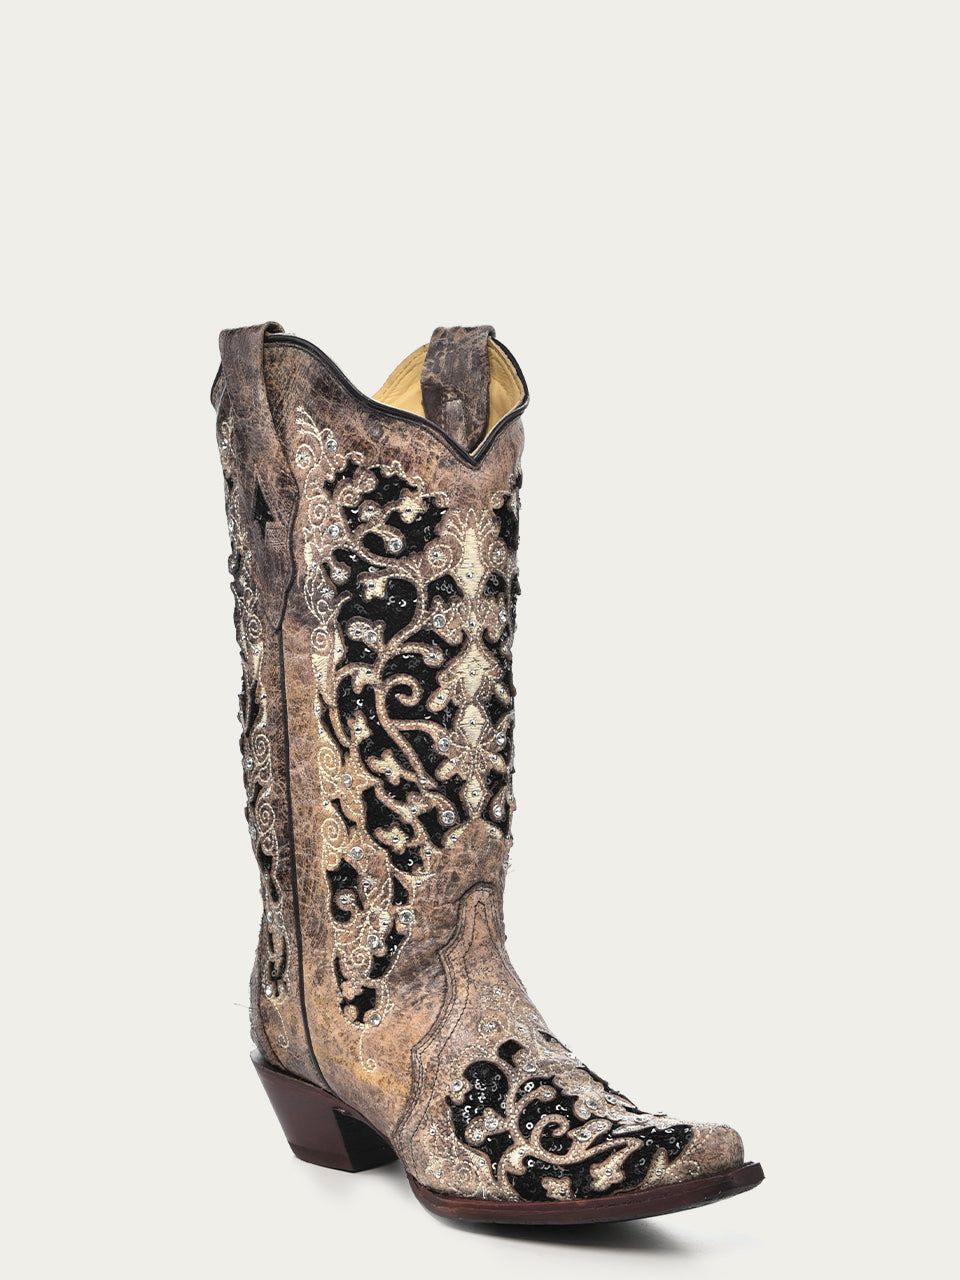 Corral Women's Sanded Leopard Print Square Toe Western Boots C3788